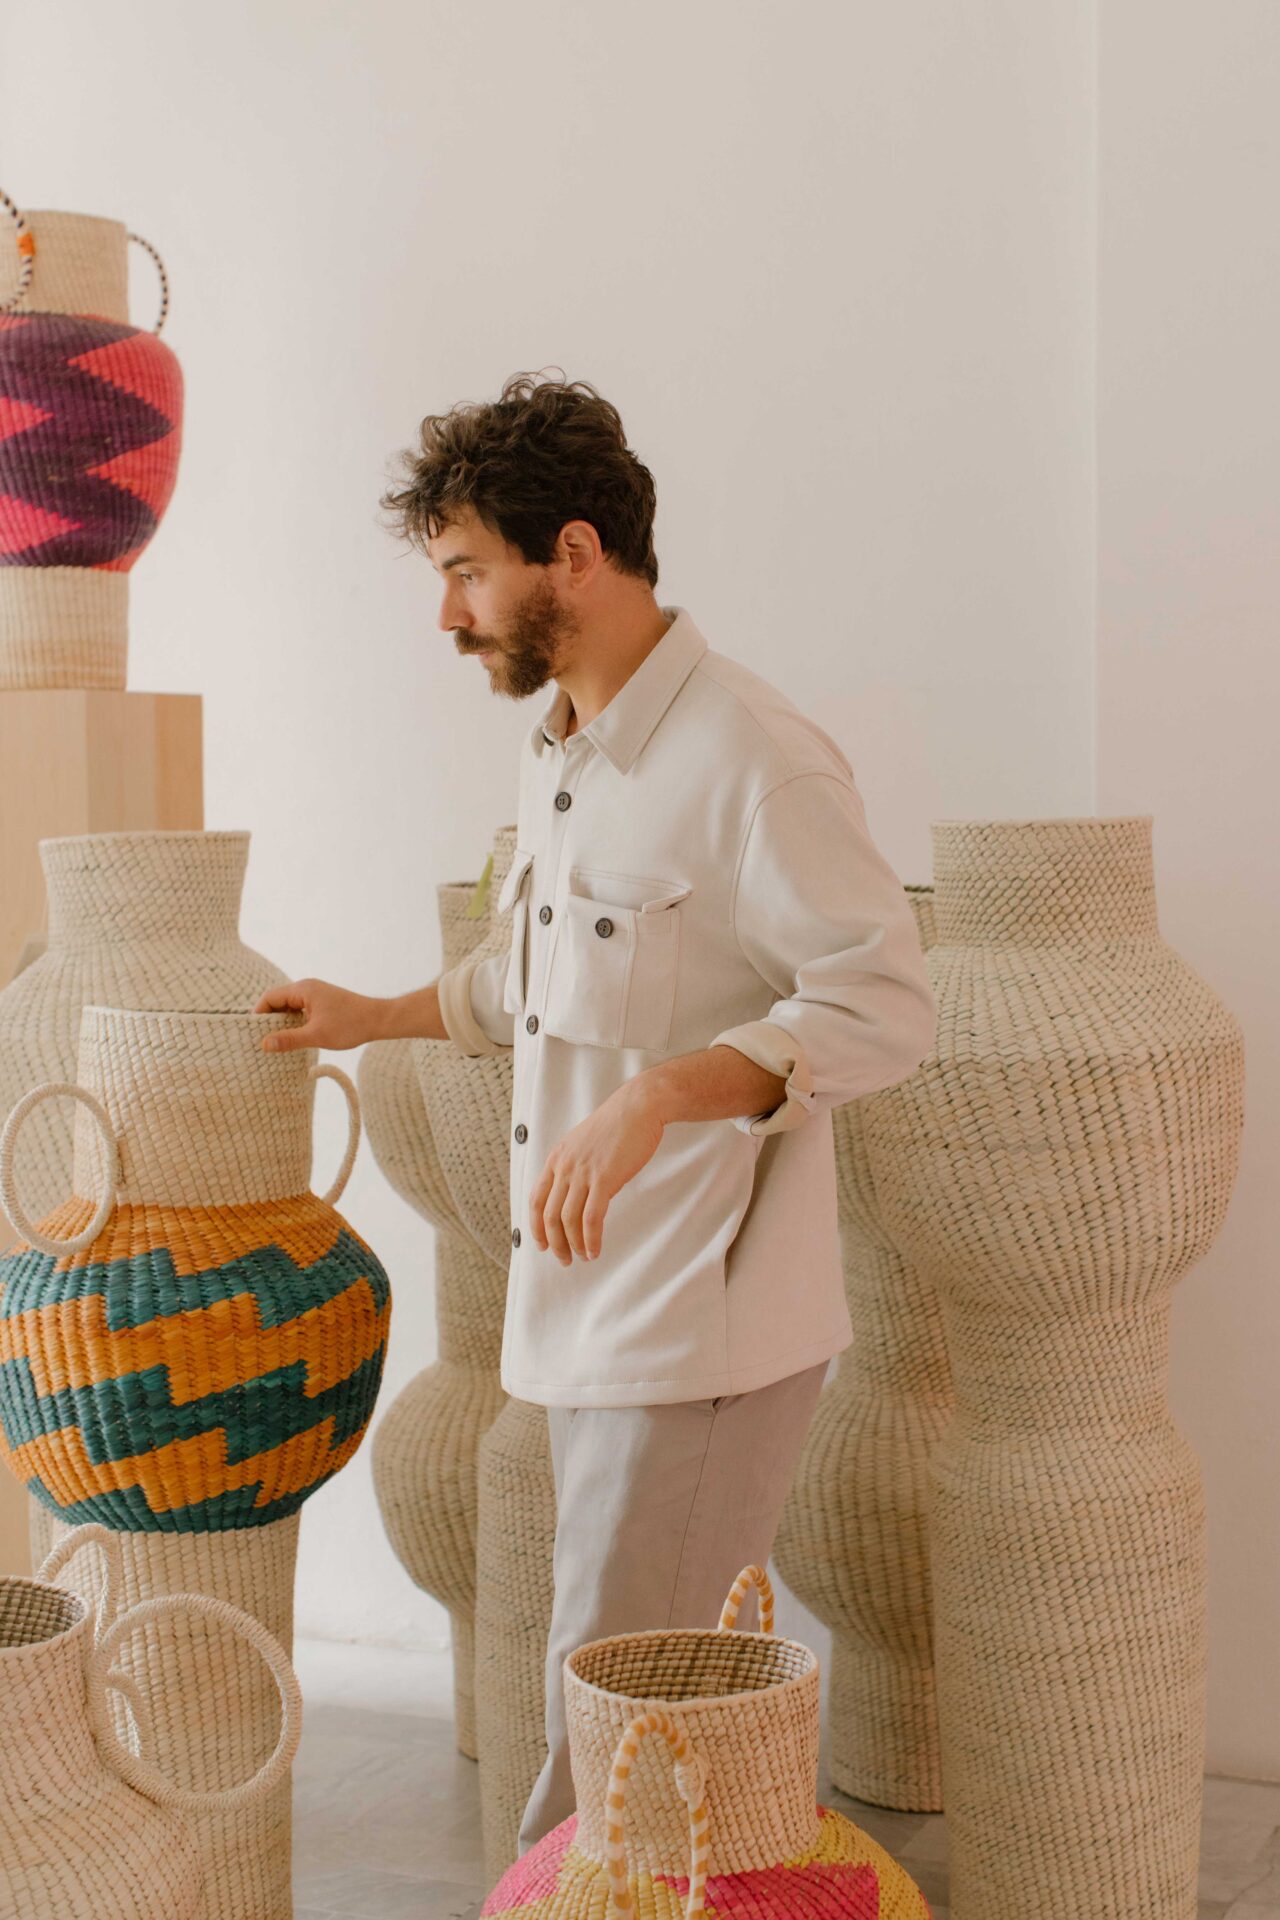 Javier Reyes, rrres studio, Oaxacao | the designer in his studio, wearing a white outfit and looking at some colourful woven baskets